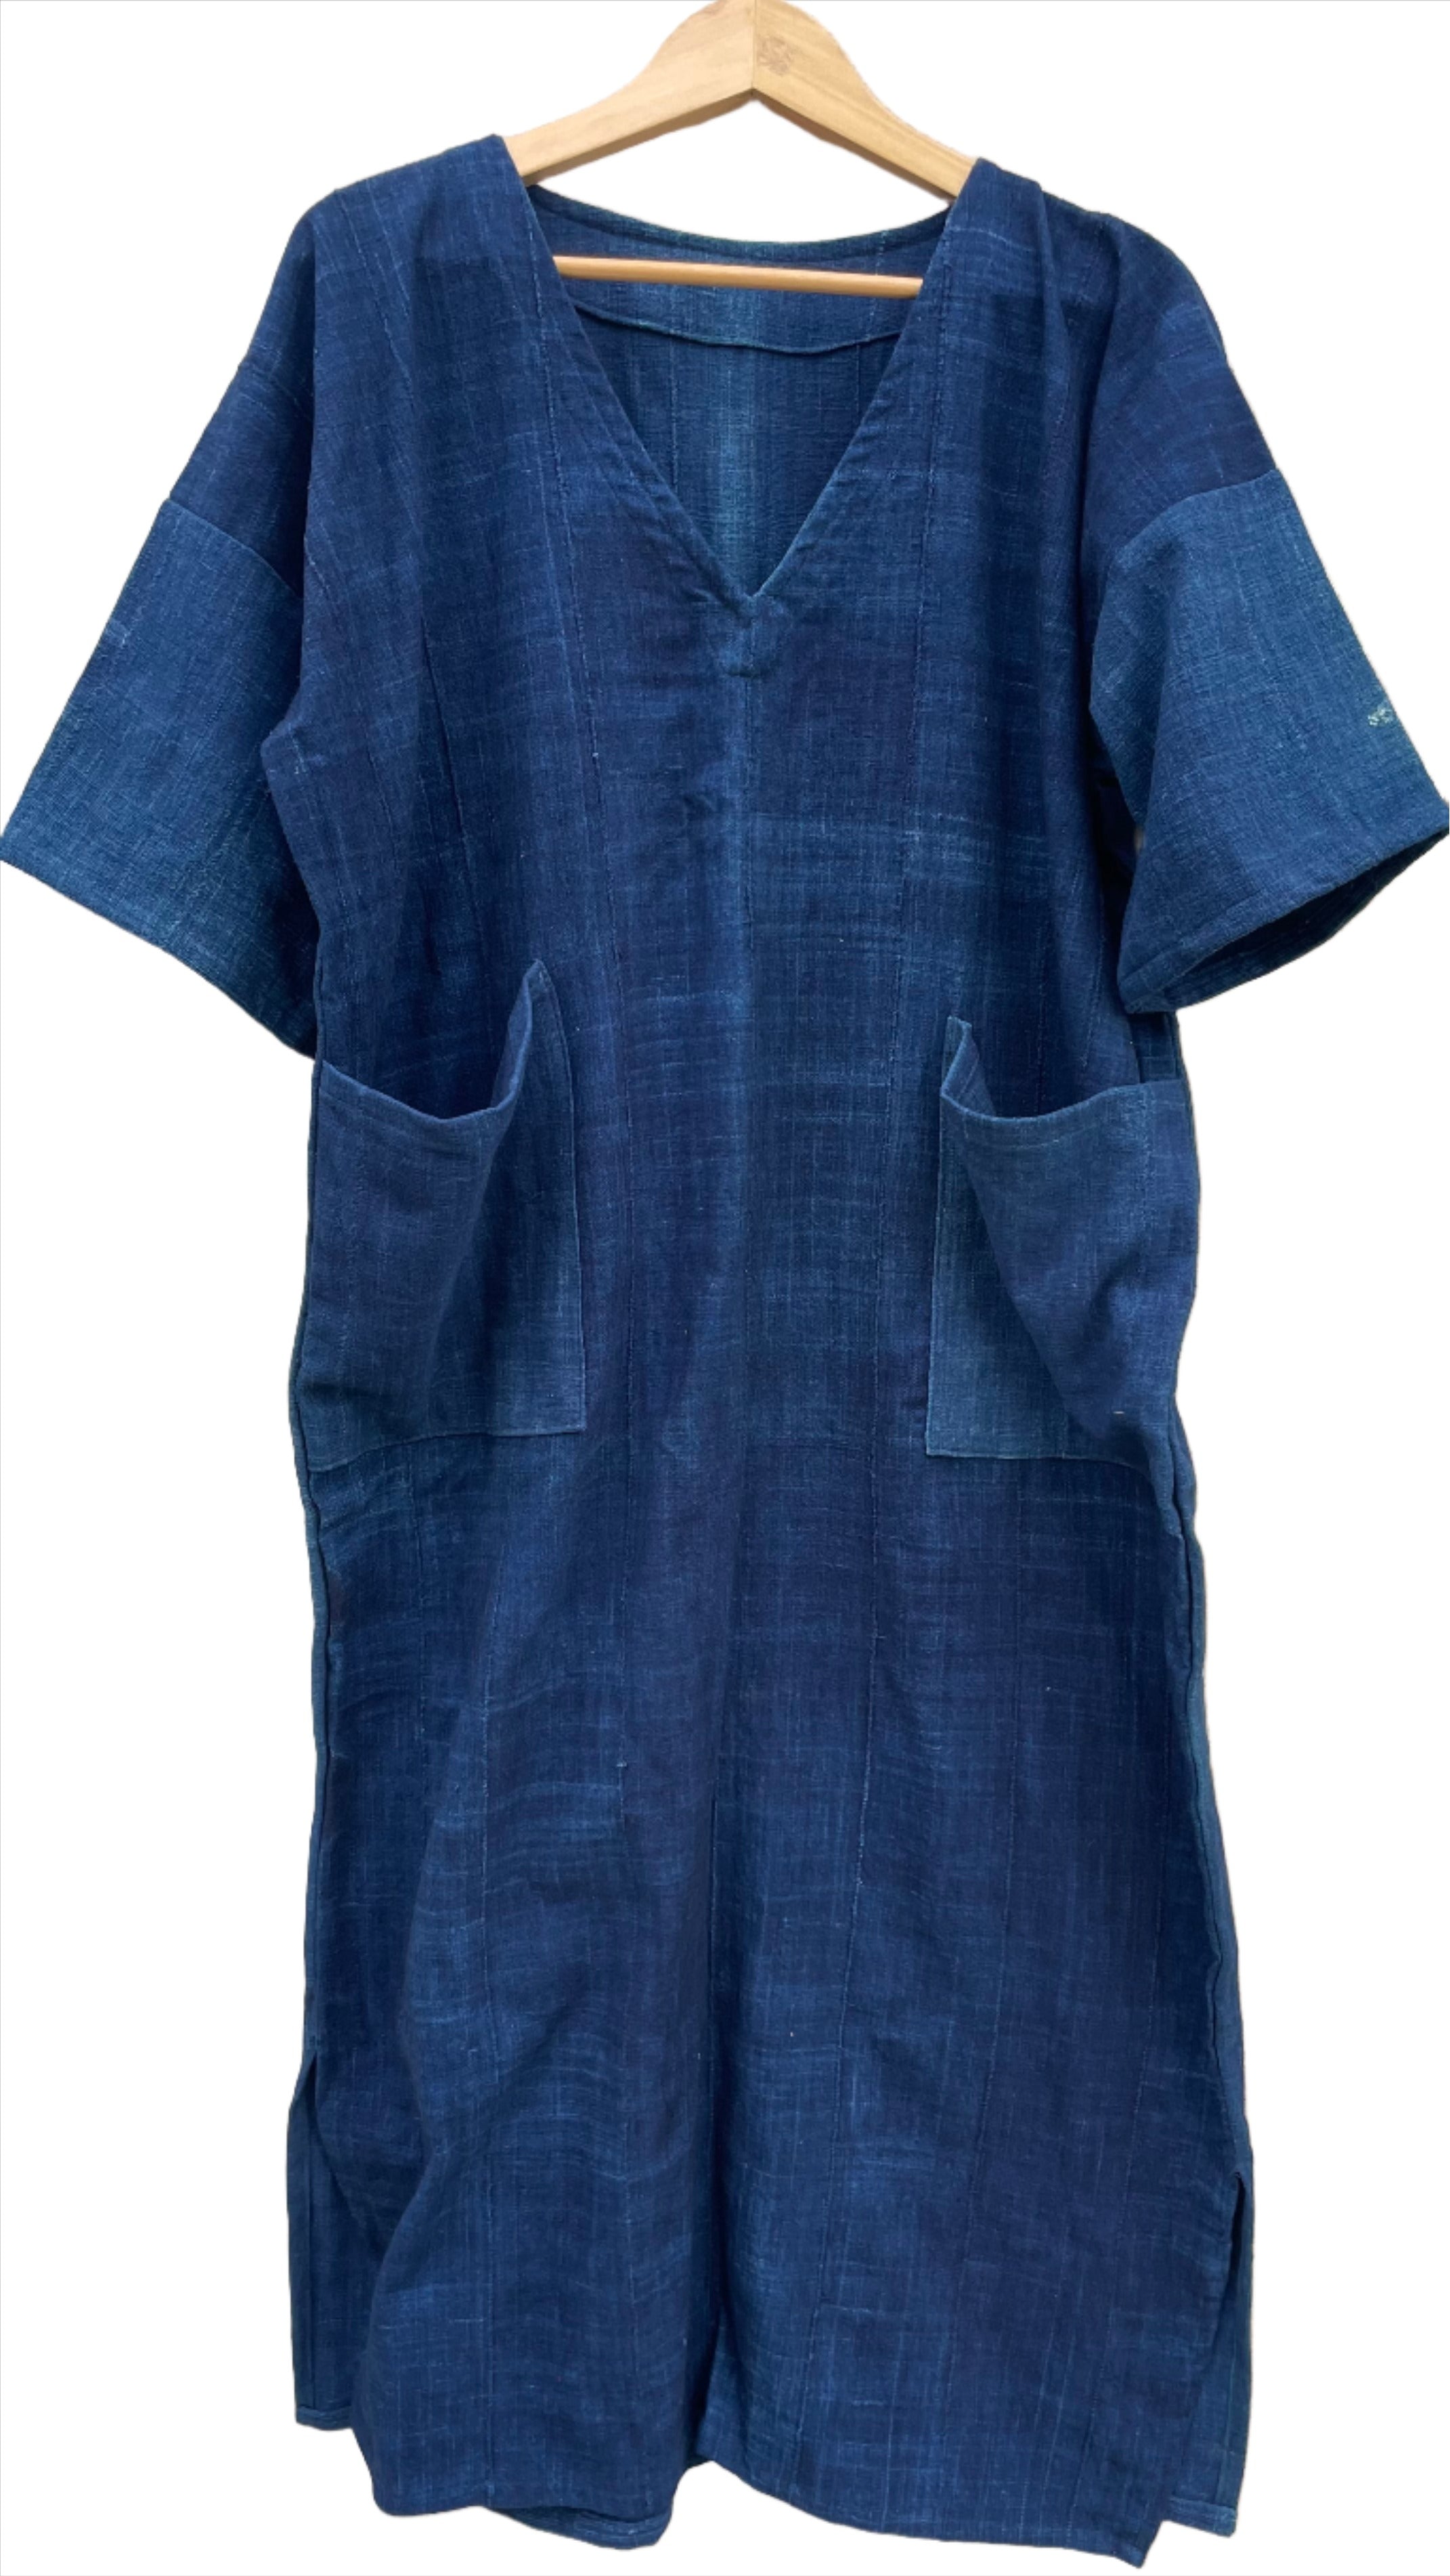 Handcrafted Mudcloth Clothing;Woven Fabrics Of Jute Or Of Other Textile Bast Fibers;Indigo Mudcloth Dress, African Cotton Textile, Hand Dyed Solid Blue Dress, Indigo Fabric Dress Clothing